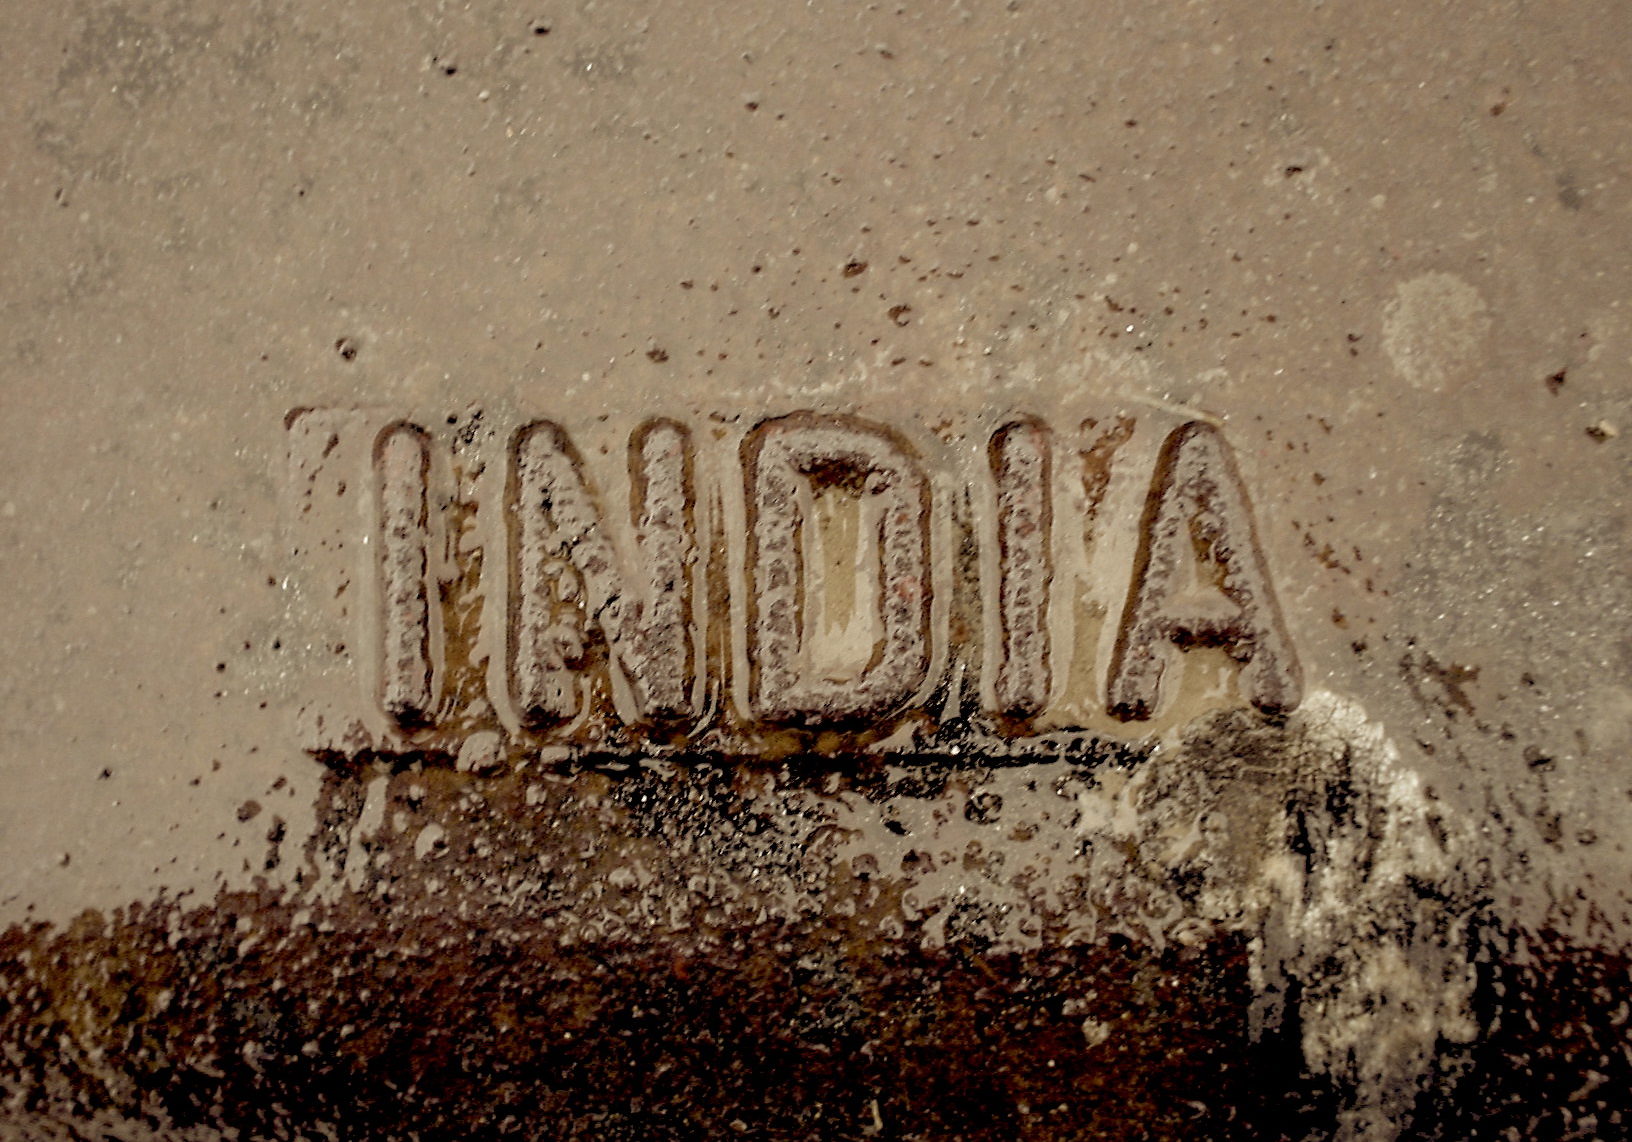 India storm drain cover Flickr_Nate Grigg